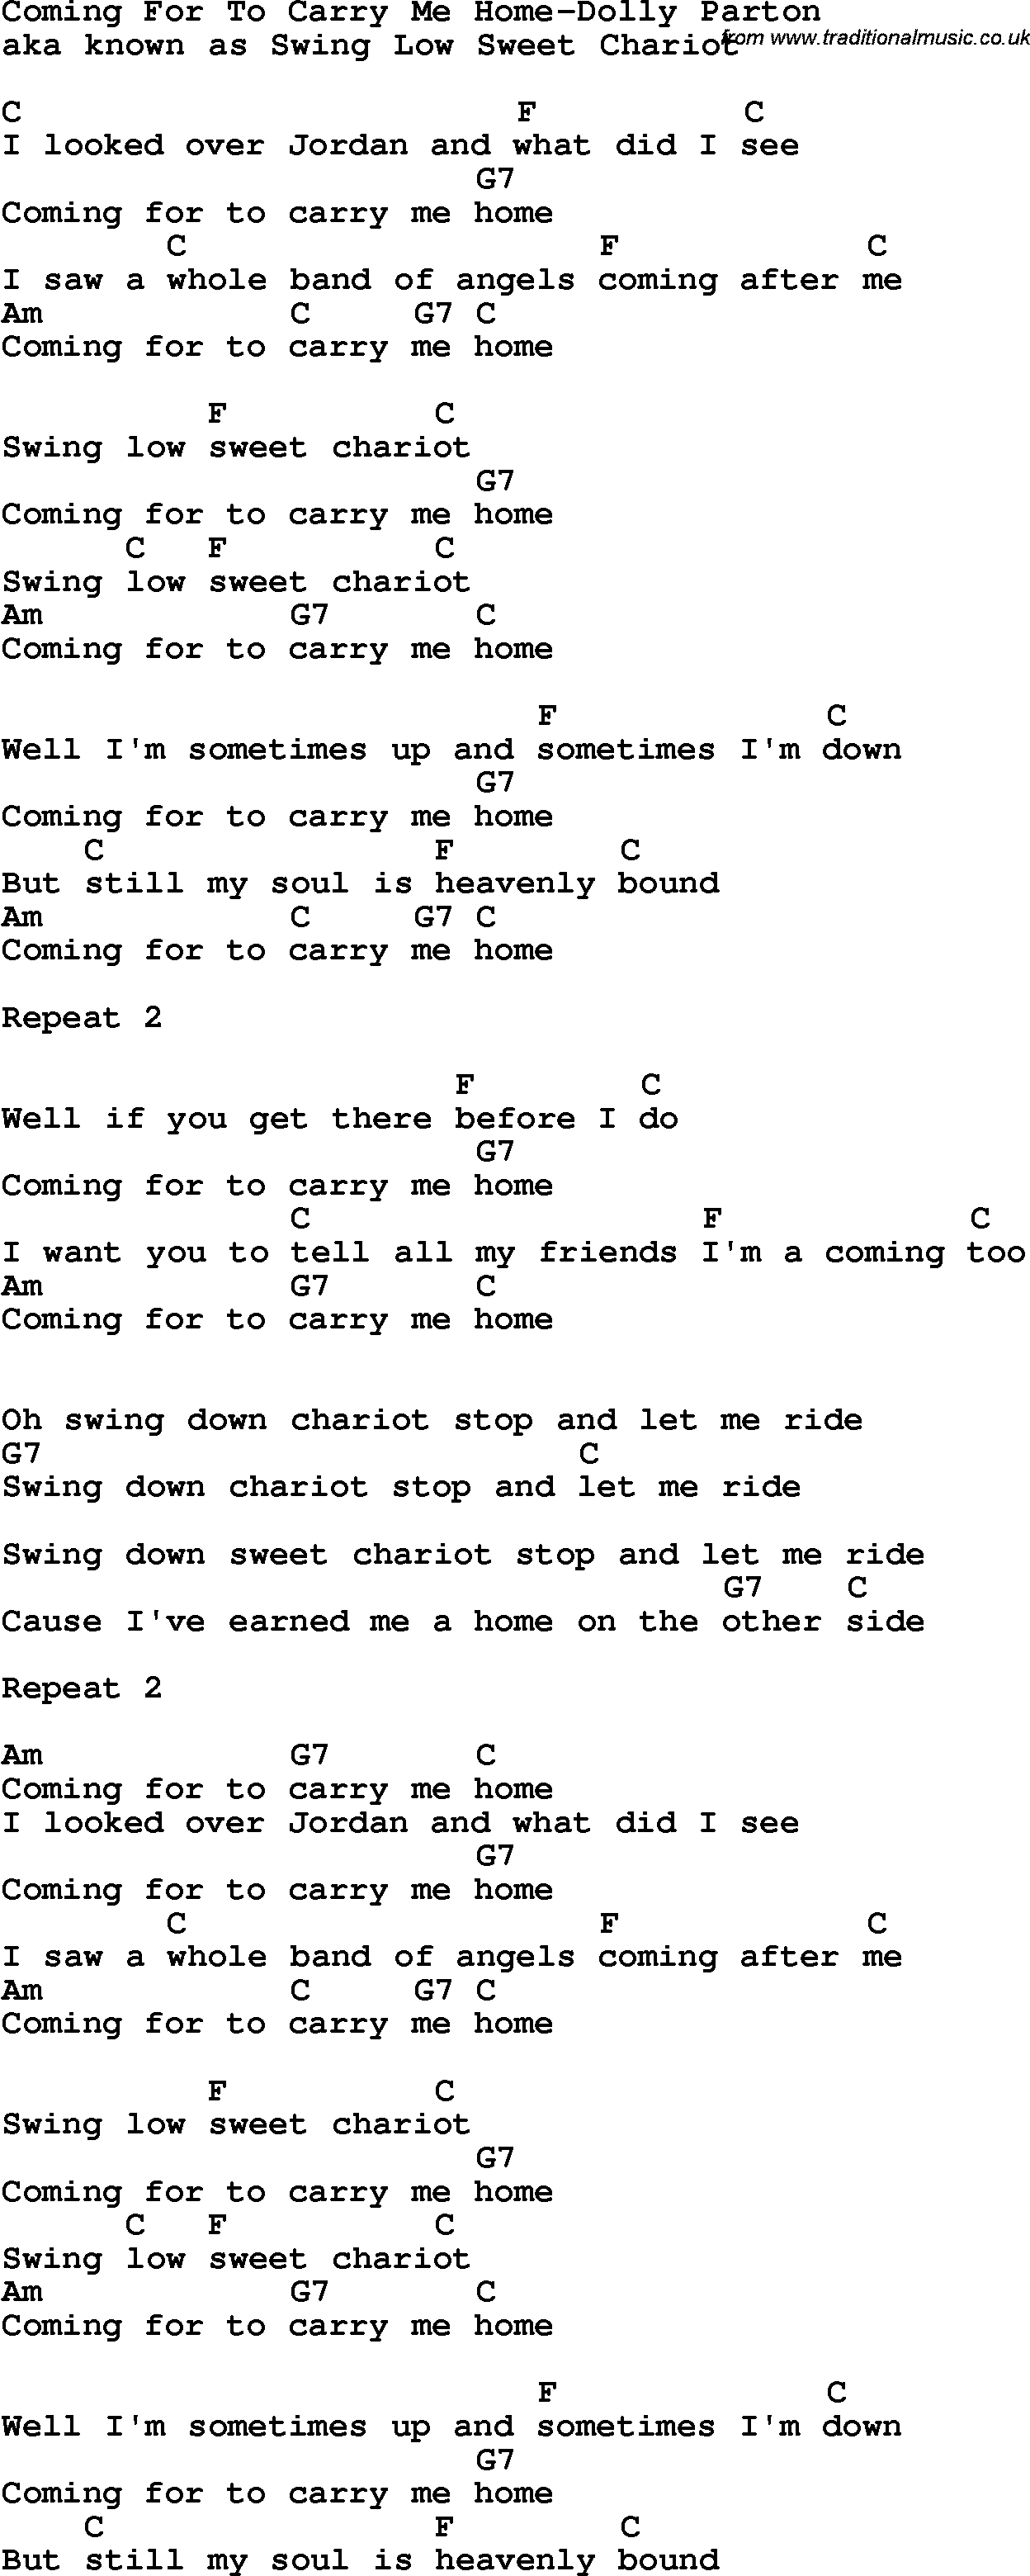 Country, Southern and Bluegrass Gospel Song Coming For To Carry Me Home-Dolly Parton lyrics and chords